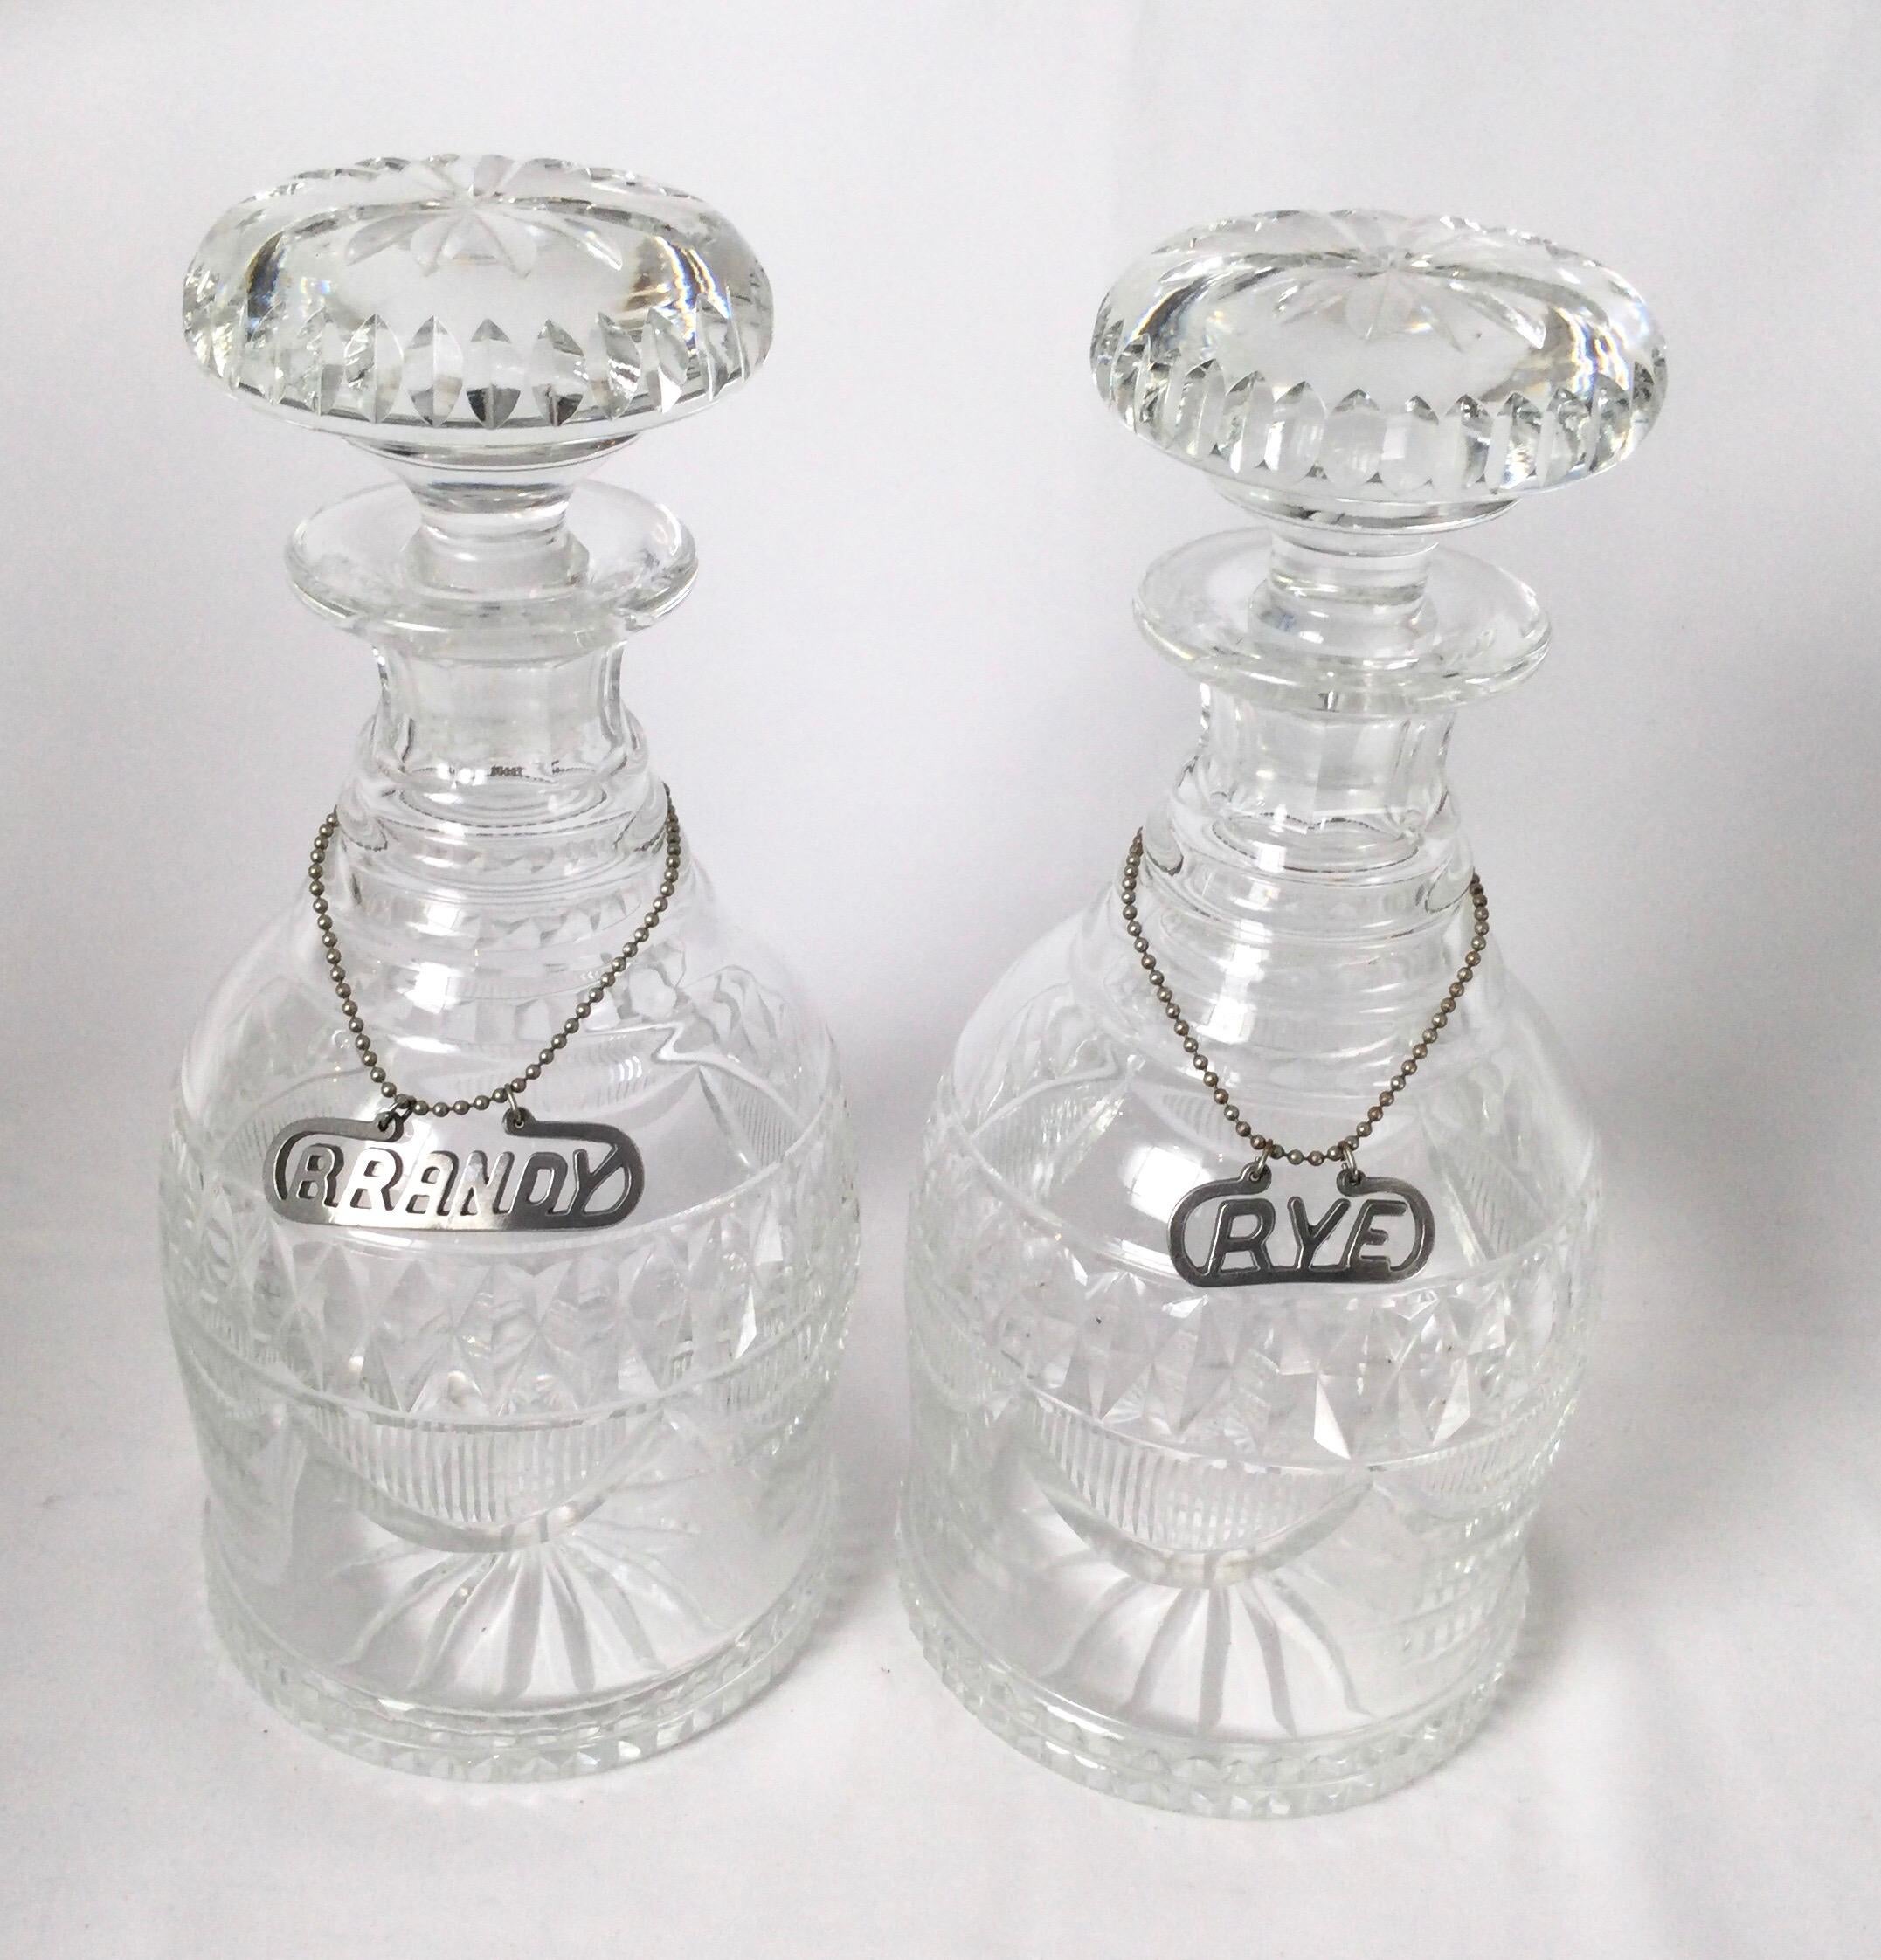 A pair of handcut glass liquor decanters with original stoppers. The bottles with ring necks, diamond pattern cut band and draped decoration. The bottoms with a starburst pattern in the center. Mid-later 19th century with a later pewter label on